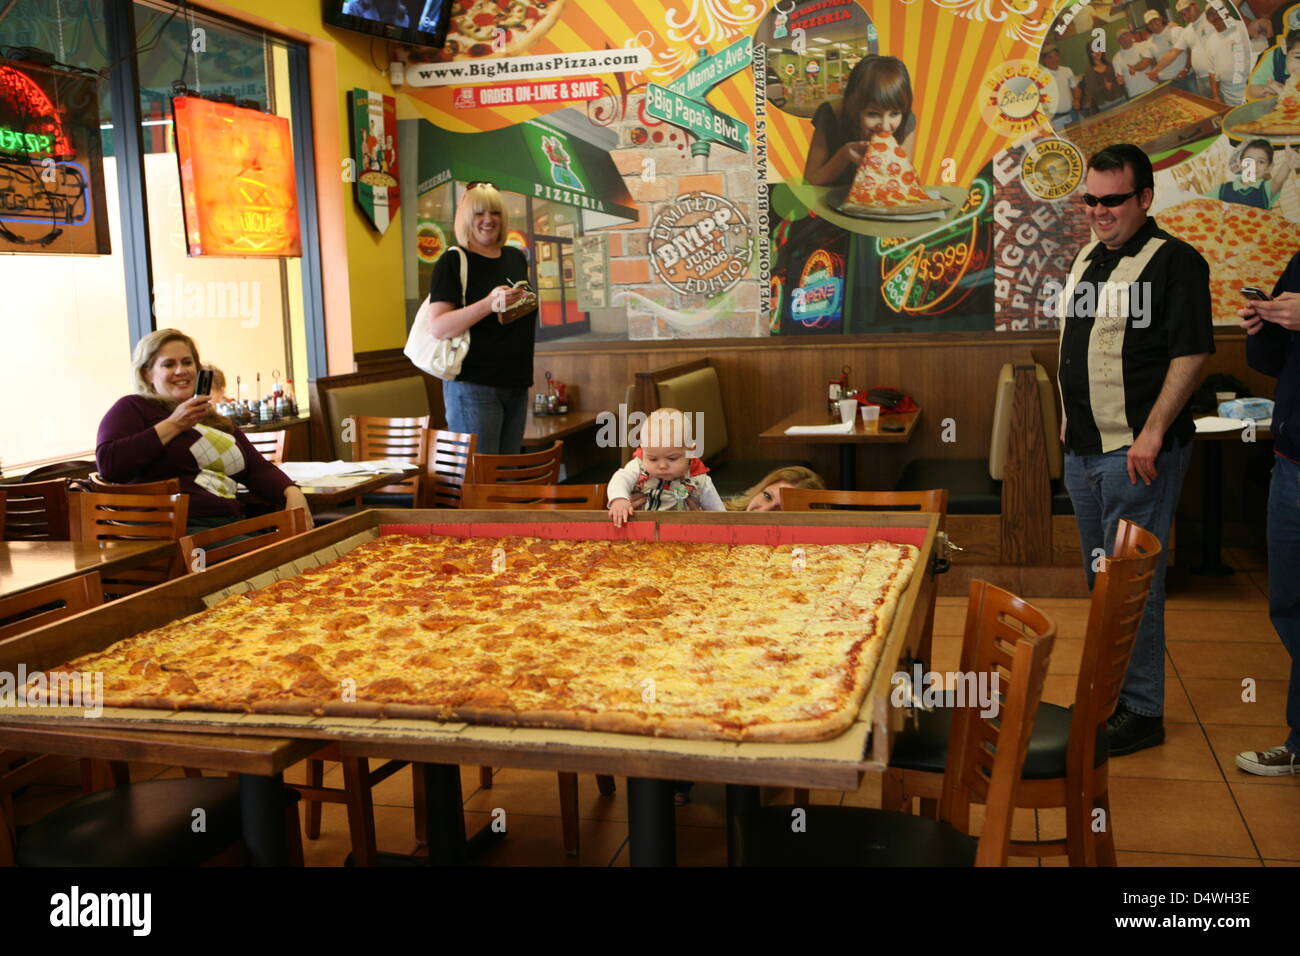 February 28, 2013, California, United States - GUINNESS WORLD RECORDS  announced that Big Mama's and Papa's Pizzeria located in Los Angeles,  California, holds the record for the largest pizza commercially available in